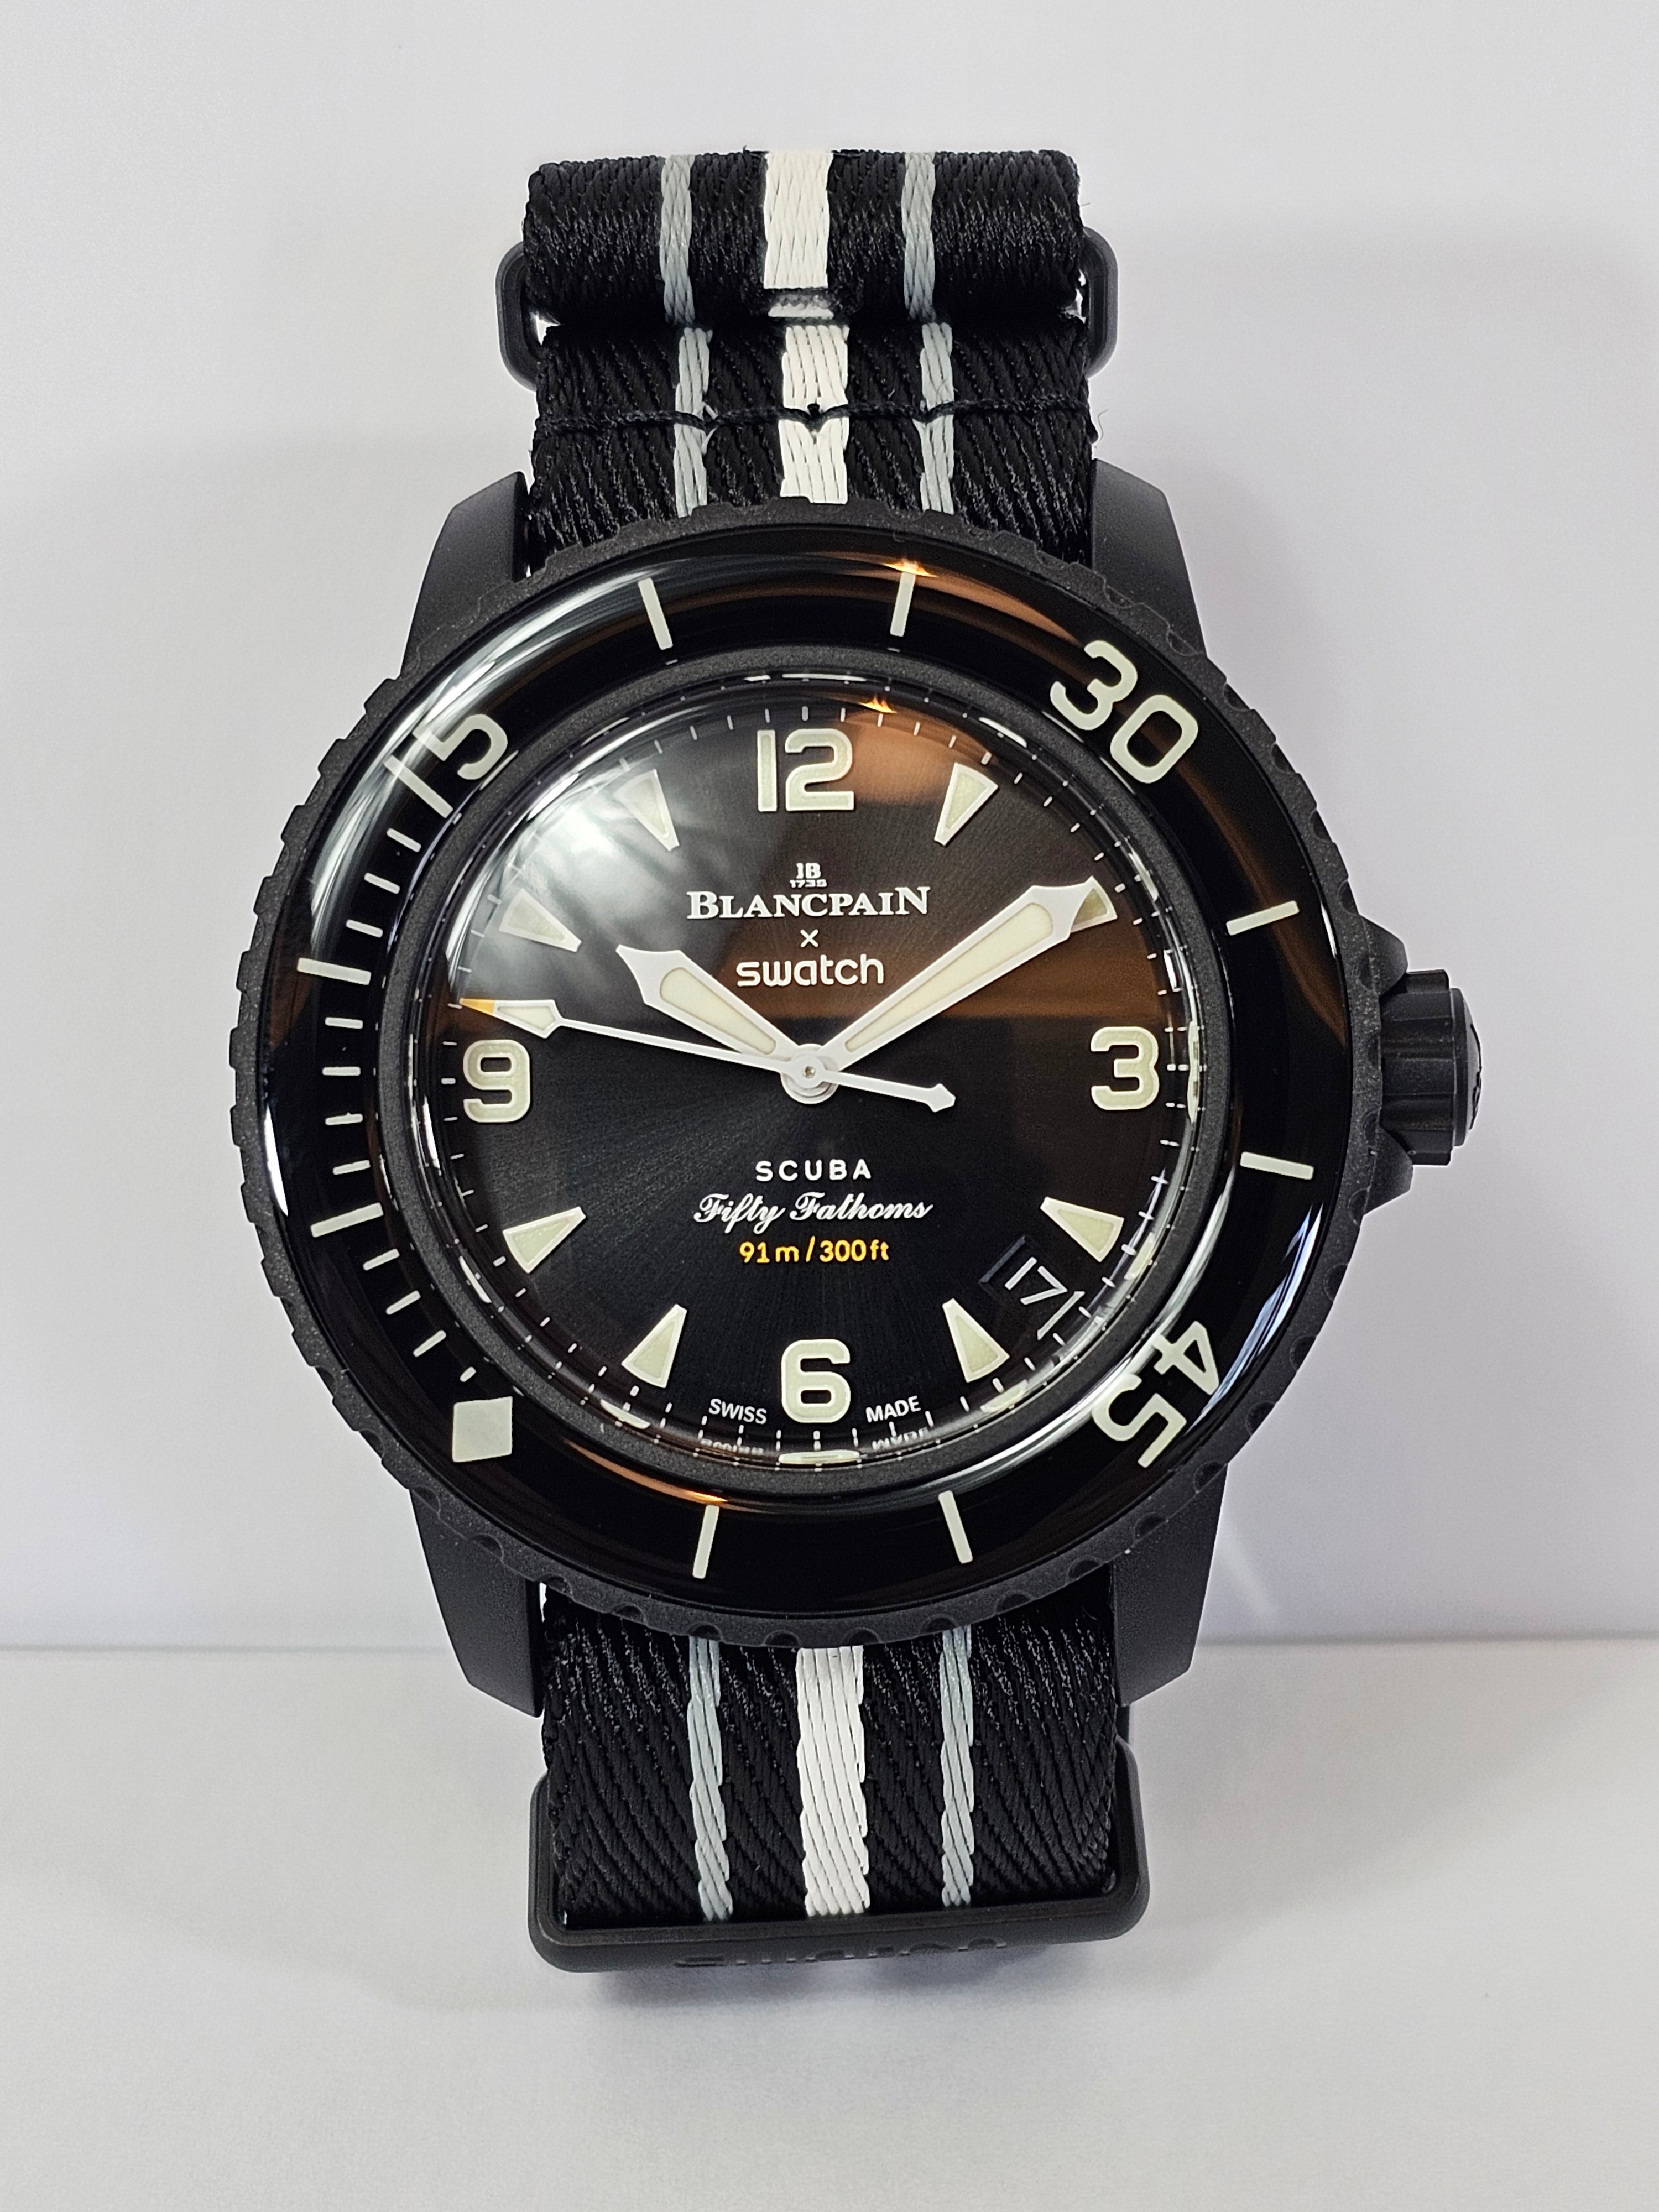 Swatch x Blancpain - Fifty Fathoms Scuba - Ocean of Storms: New 